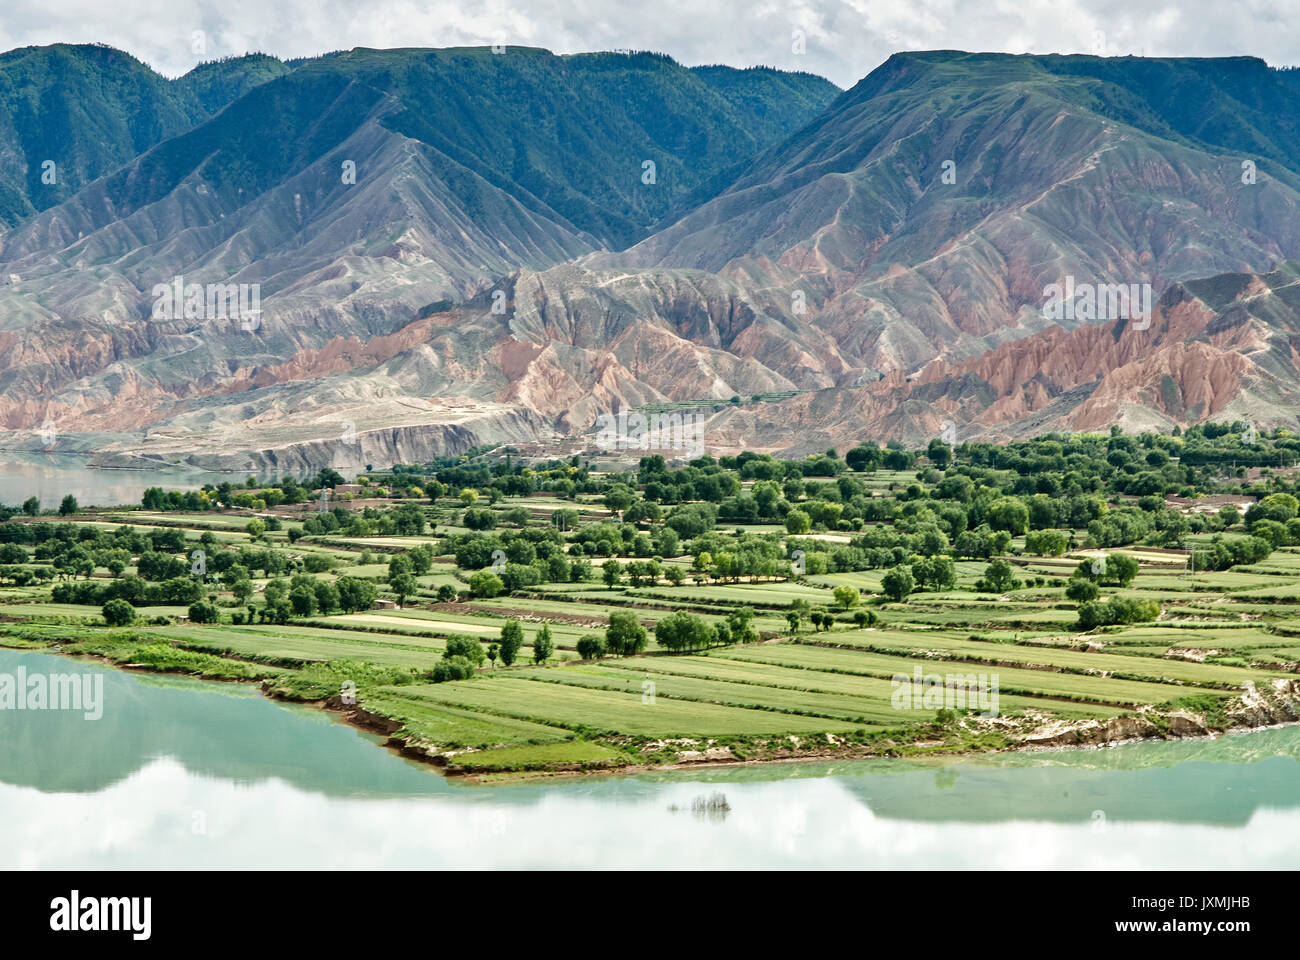 Elevated view of mountains and agricultural land by Yellow river, Sichuan, China Stock Photo